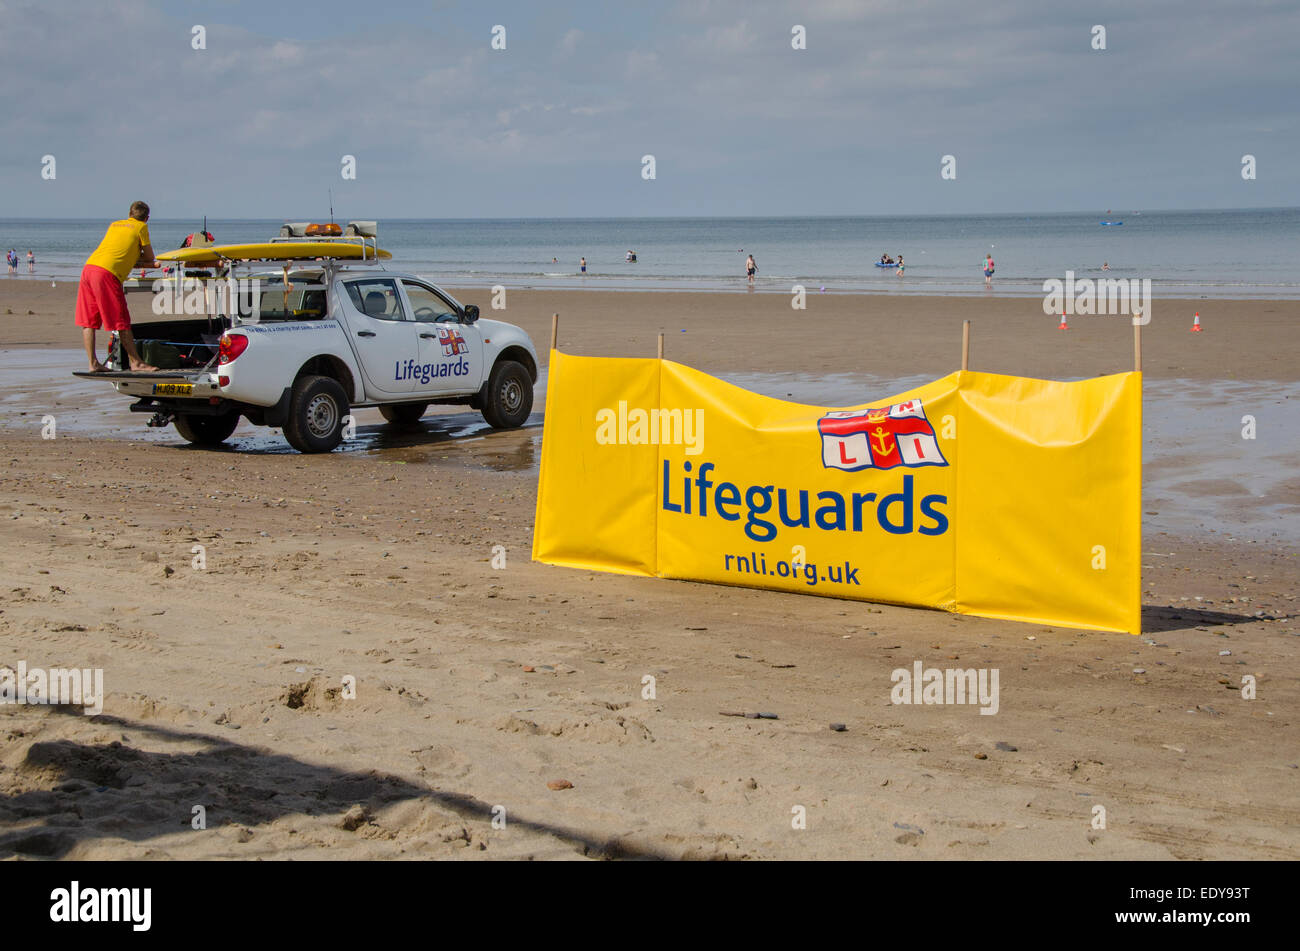 Young man on duty as RNLI lifeguard is watching people in sea & standing on back of parked pick-up truck - Whitby beach, North Yorkshire, England, UK. Stock Photo